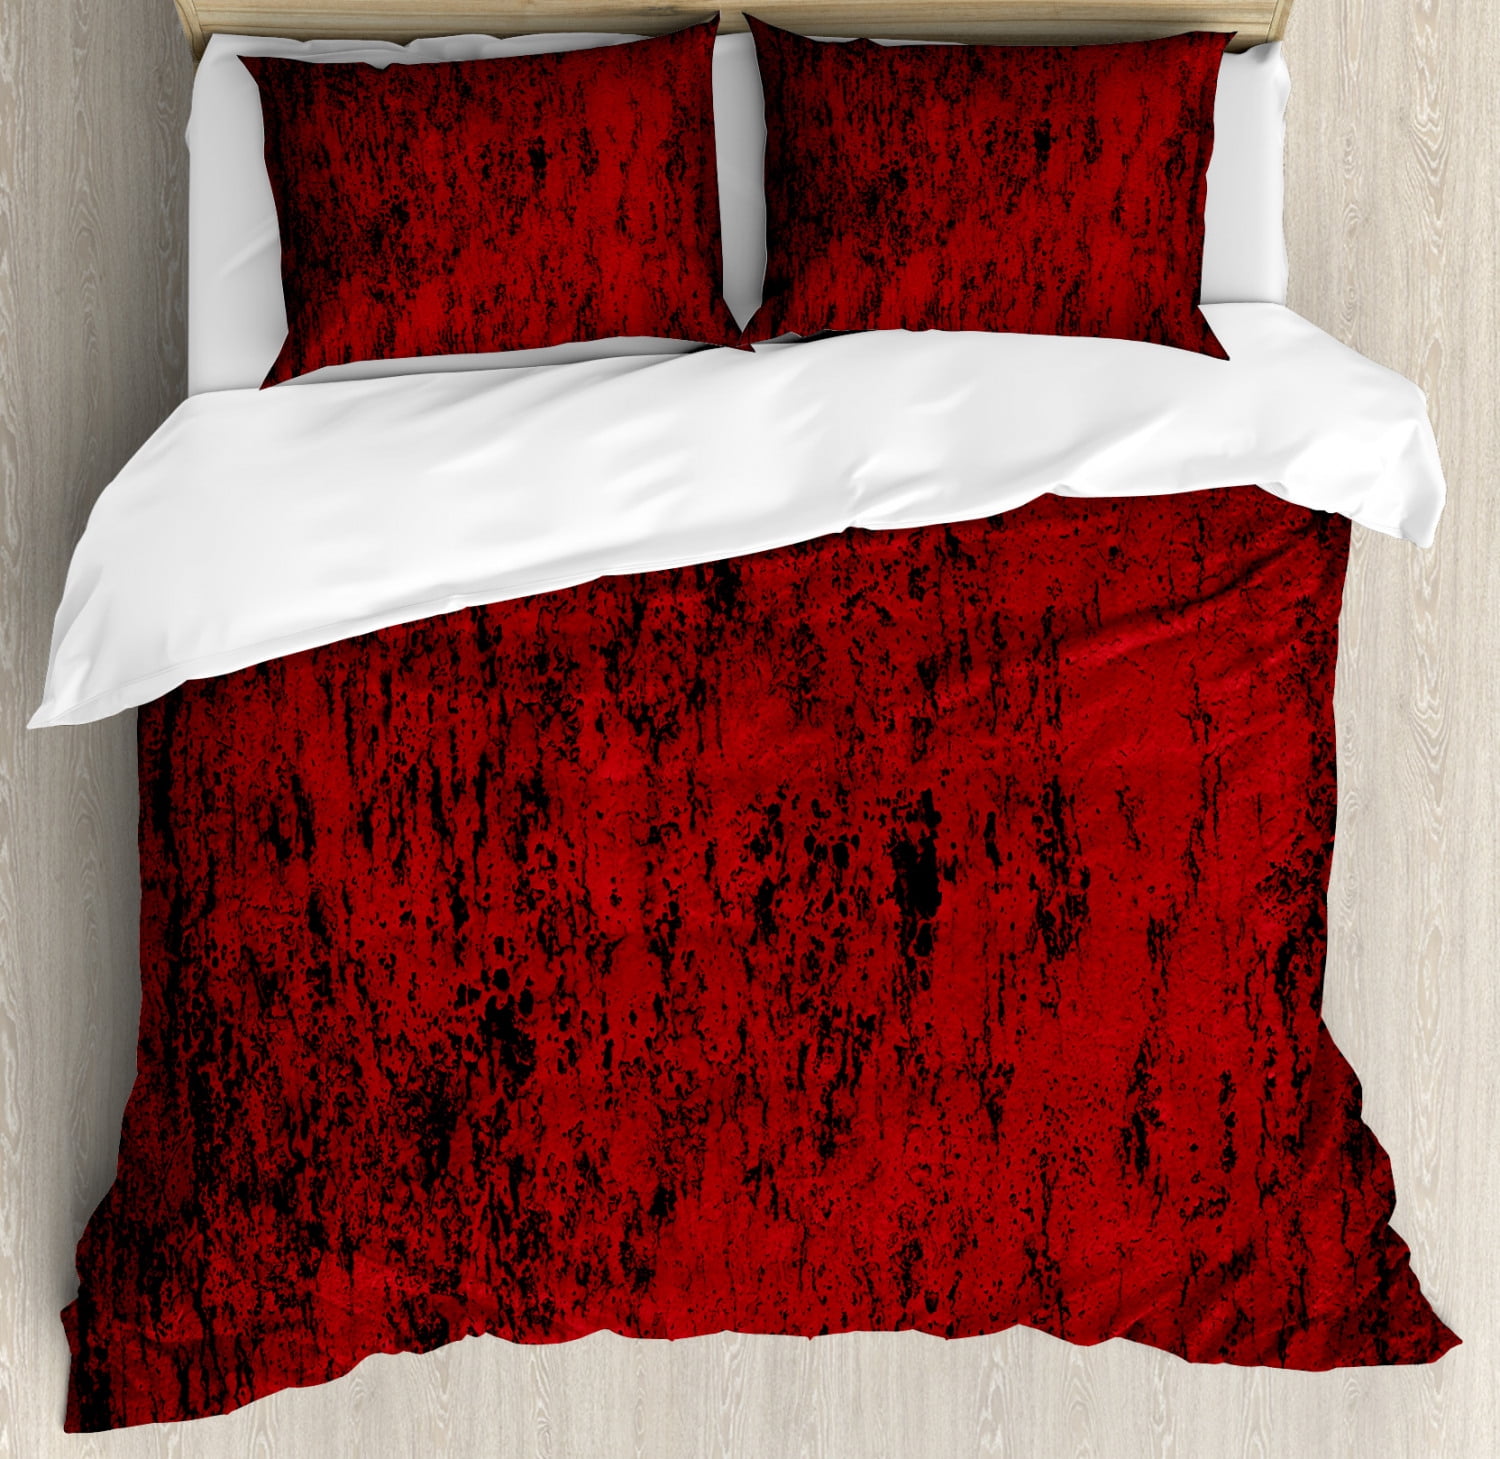 Red and Black Duvet Cover Set Queen Size, Artistic Abstract Pattern ...